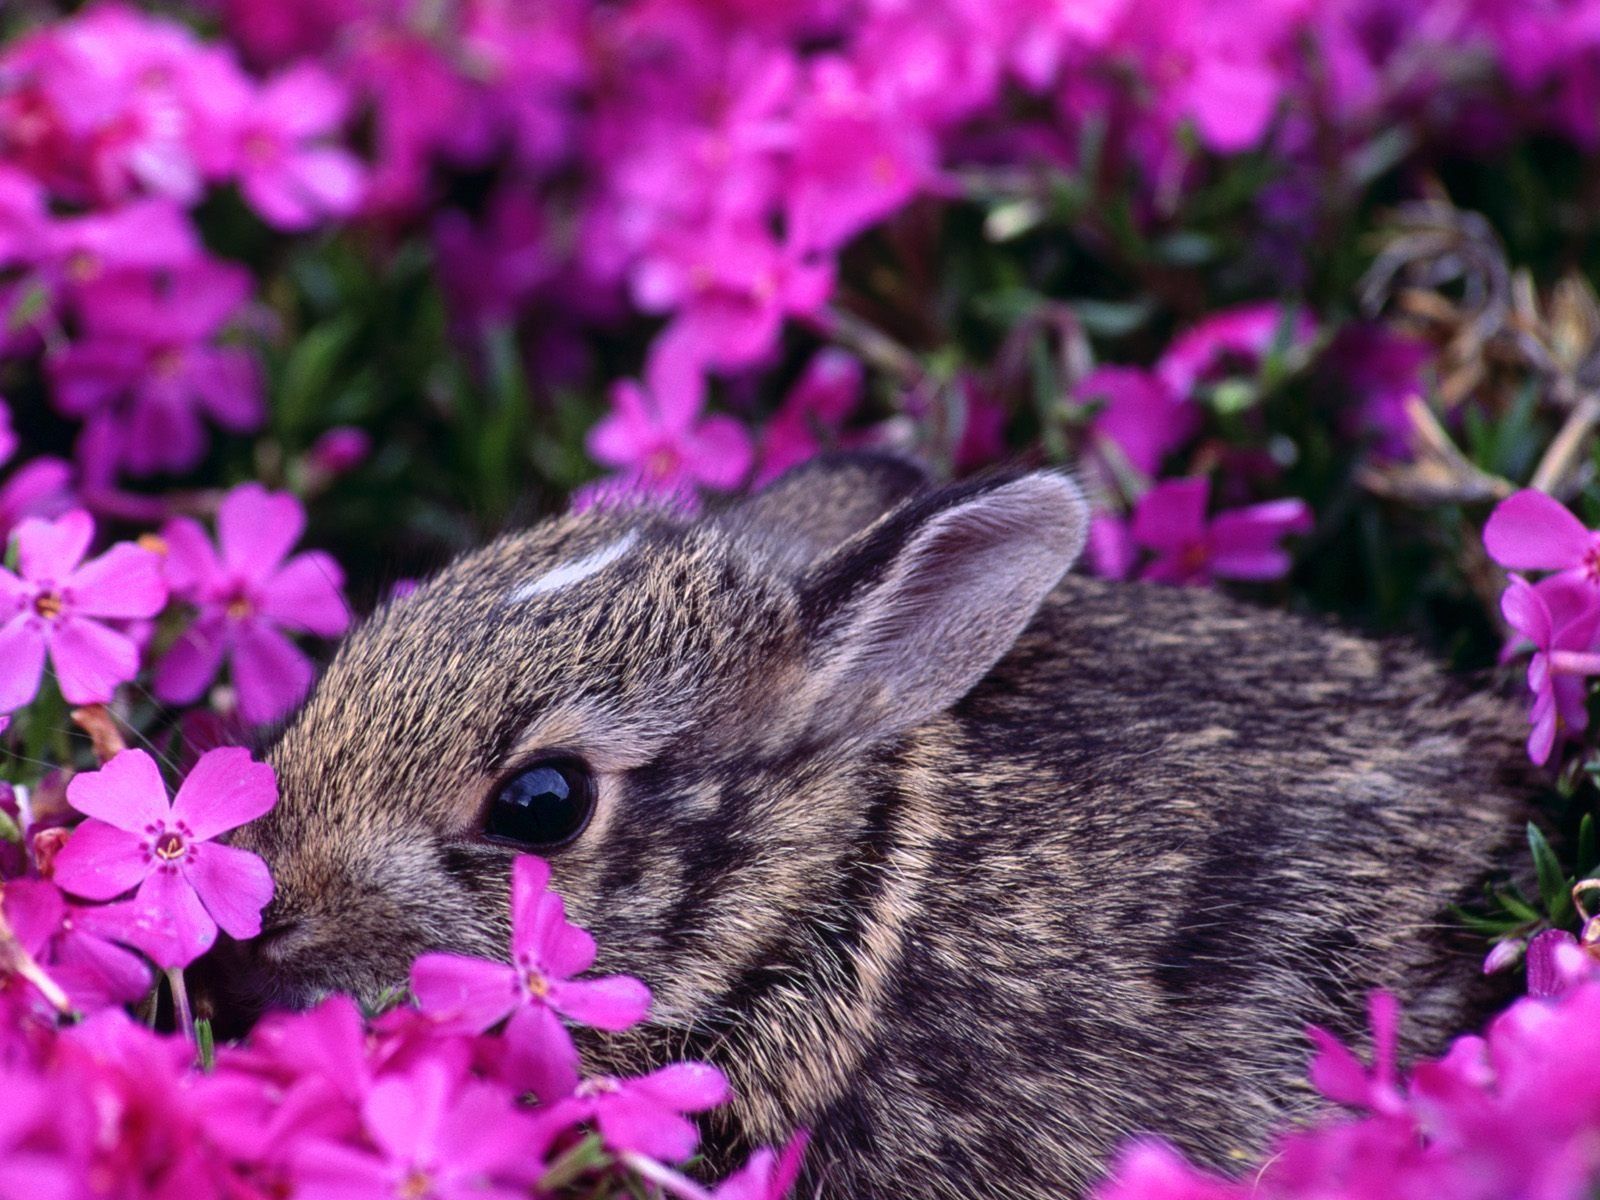 Bunny with flowers. Cute animals, Baby animals, Animals beautiful